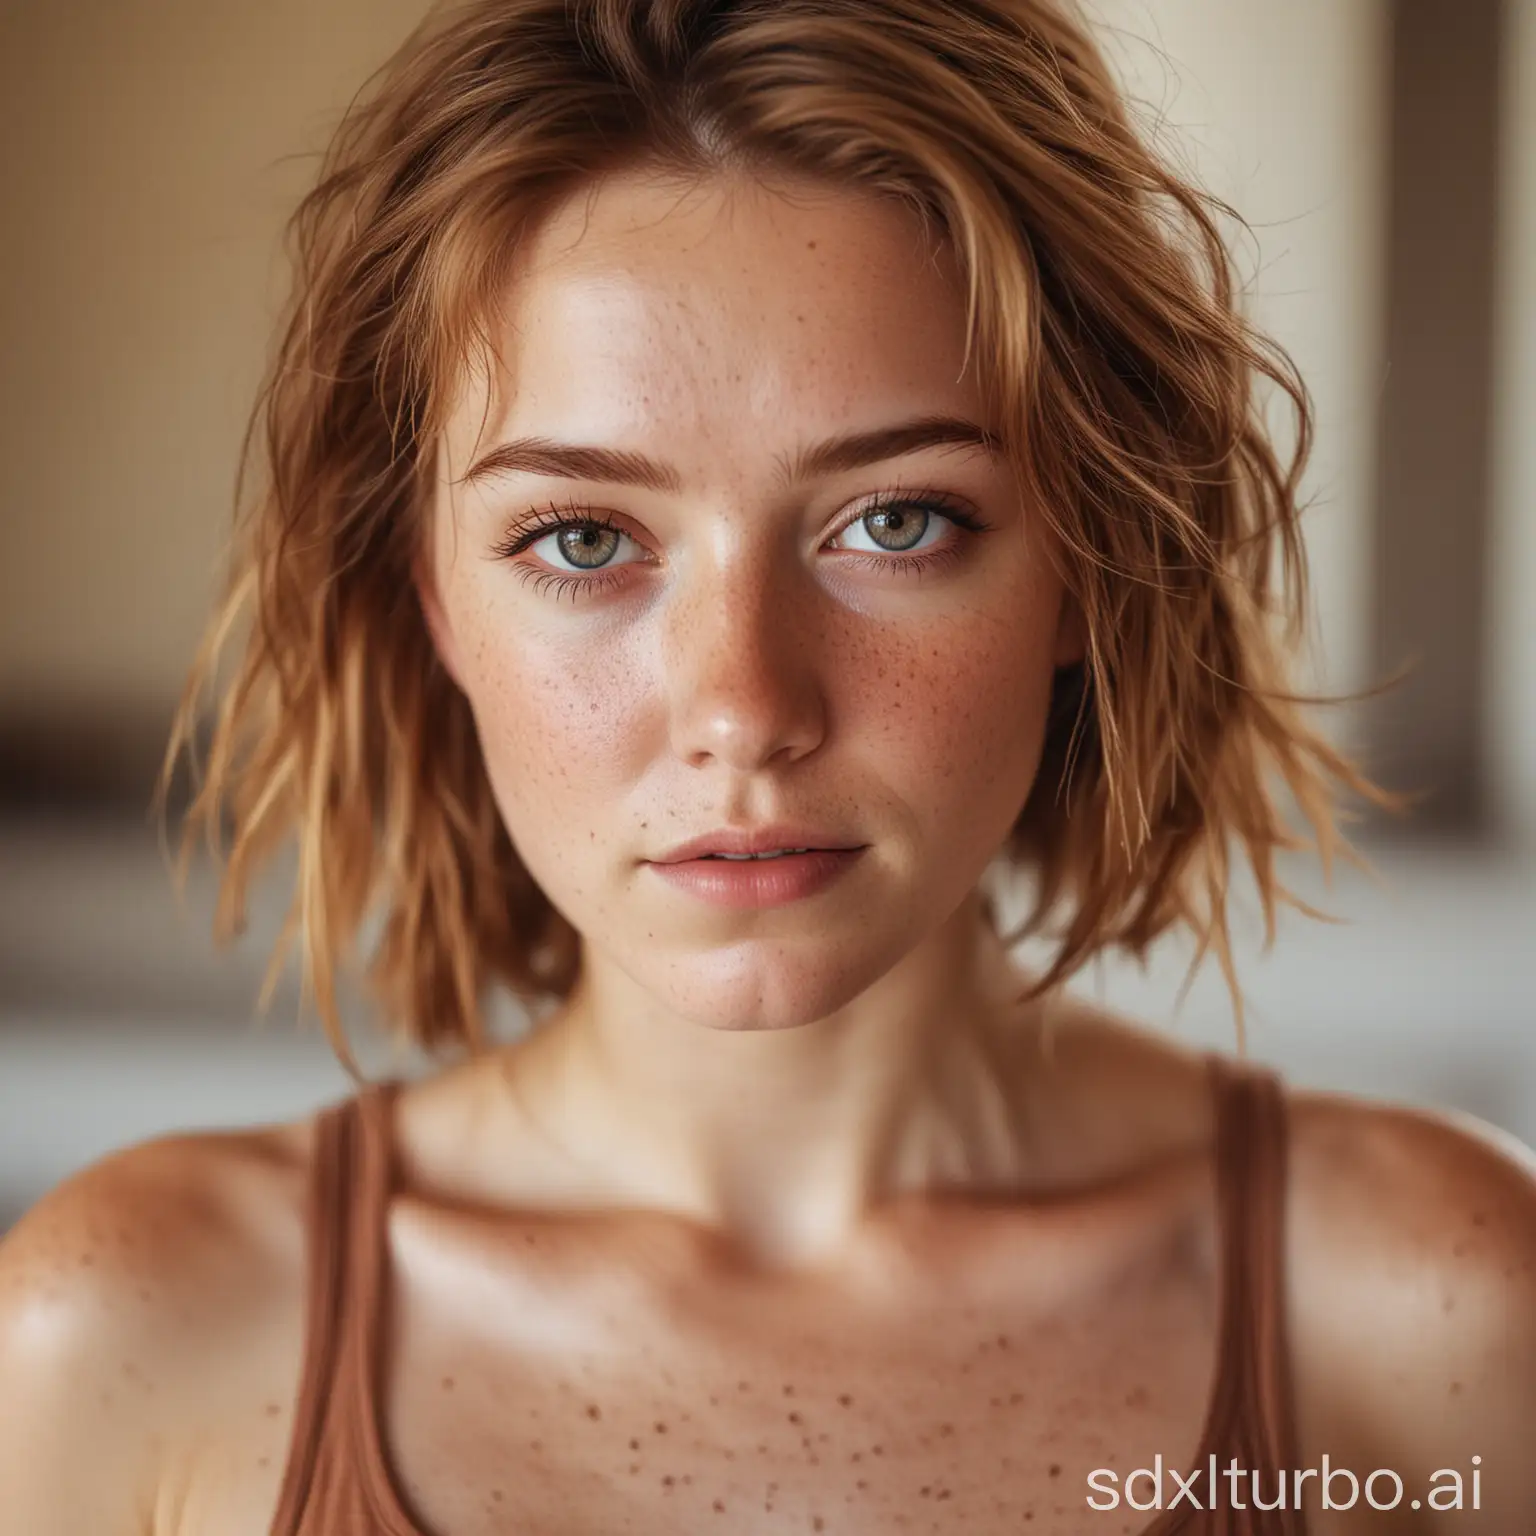 Portrait of a woman, close-up, shallow depth of field, soft natural light, focusing on the eyes, hand in the foreground, artistic composition, freckles, light brown hair, wearing a tank top, indoor environment, casual and relaxed, warm color tone